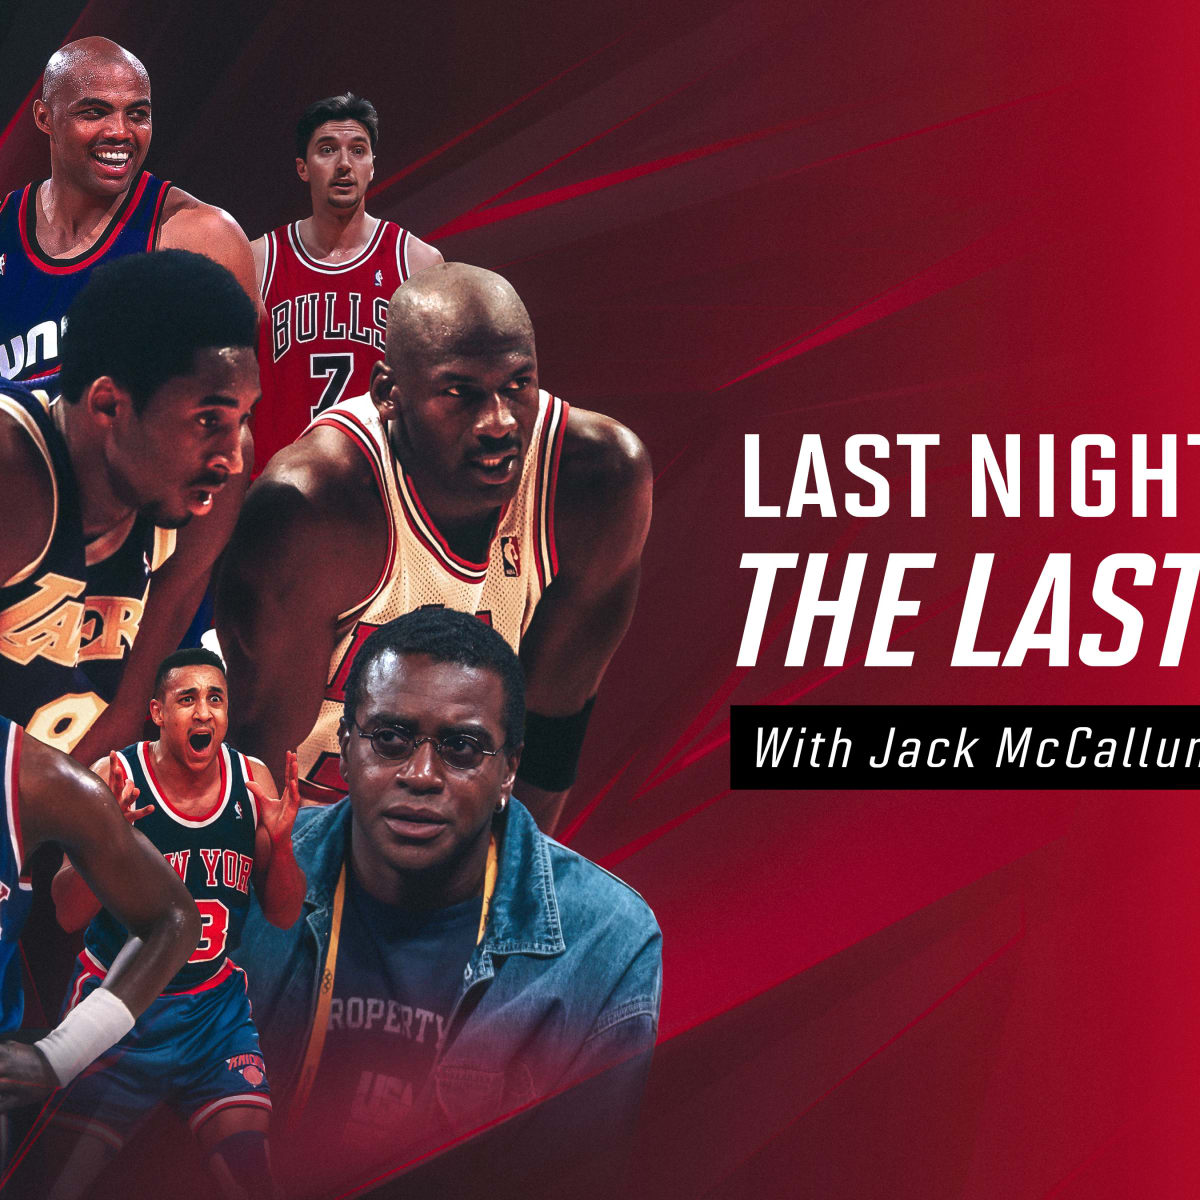 Michael Jordan's 'Last Dance' was also the last chance for the